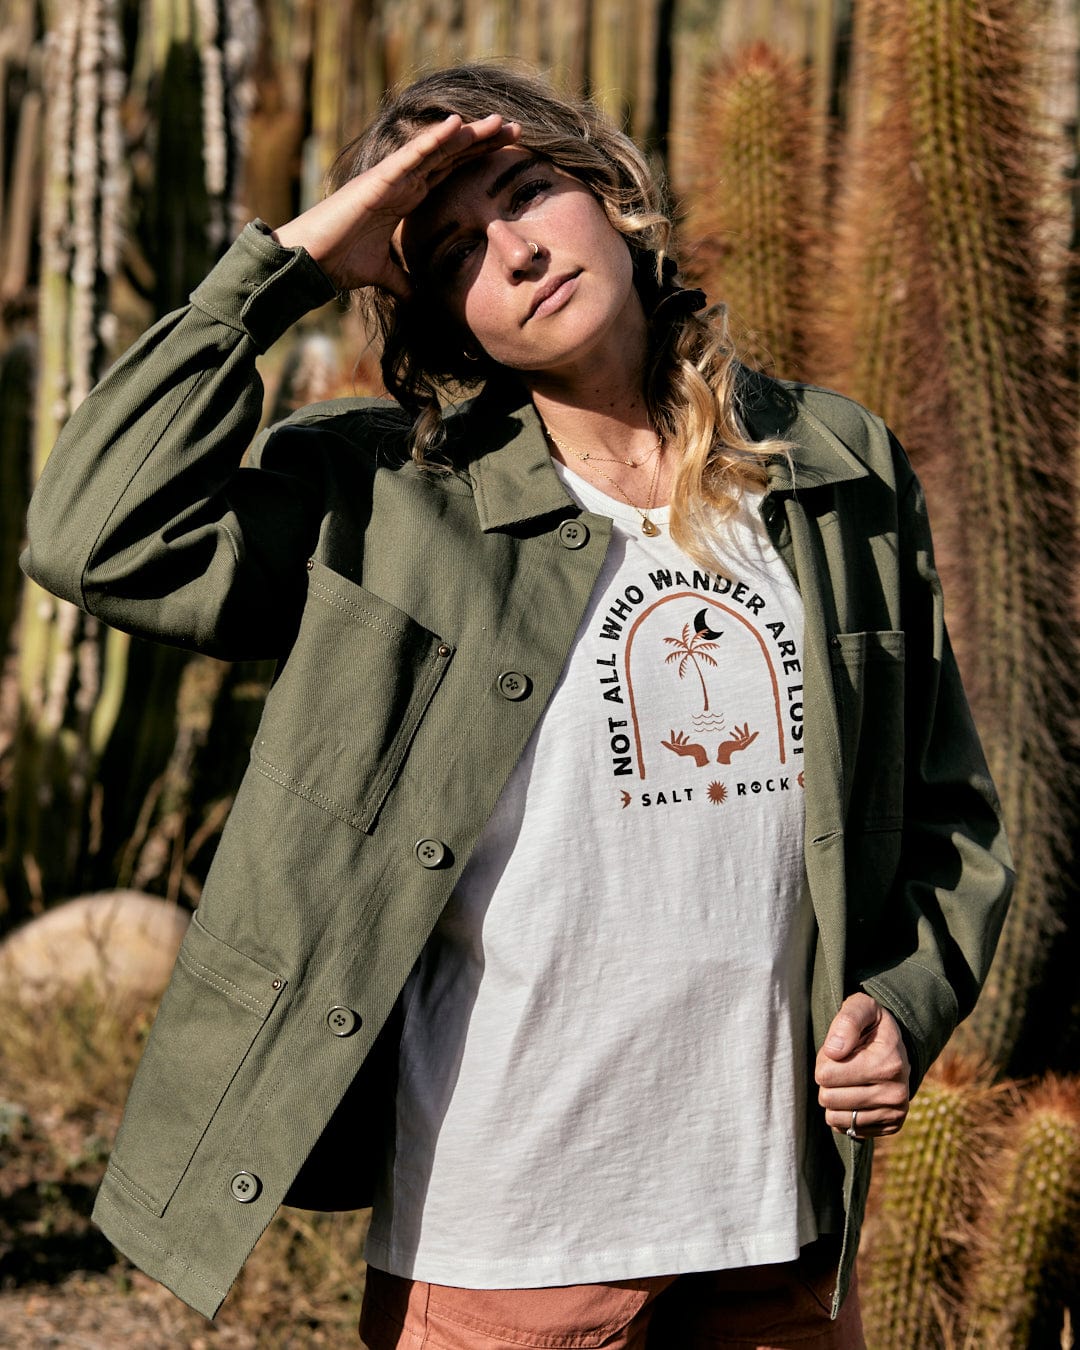 A woman in a forest, wearing a Saltrock Barden - Womens Lightweight Utility Jacket in Dark Green and white t-shirt with text, shielding her eyes from the sun.